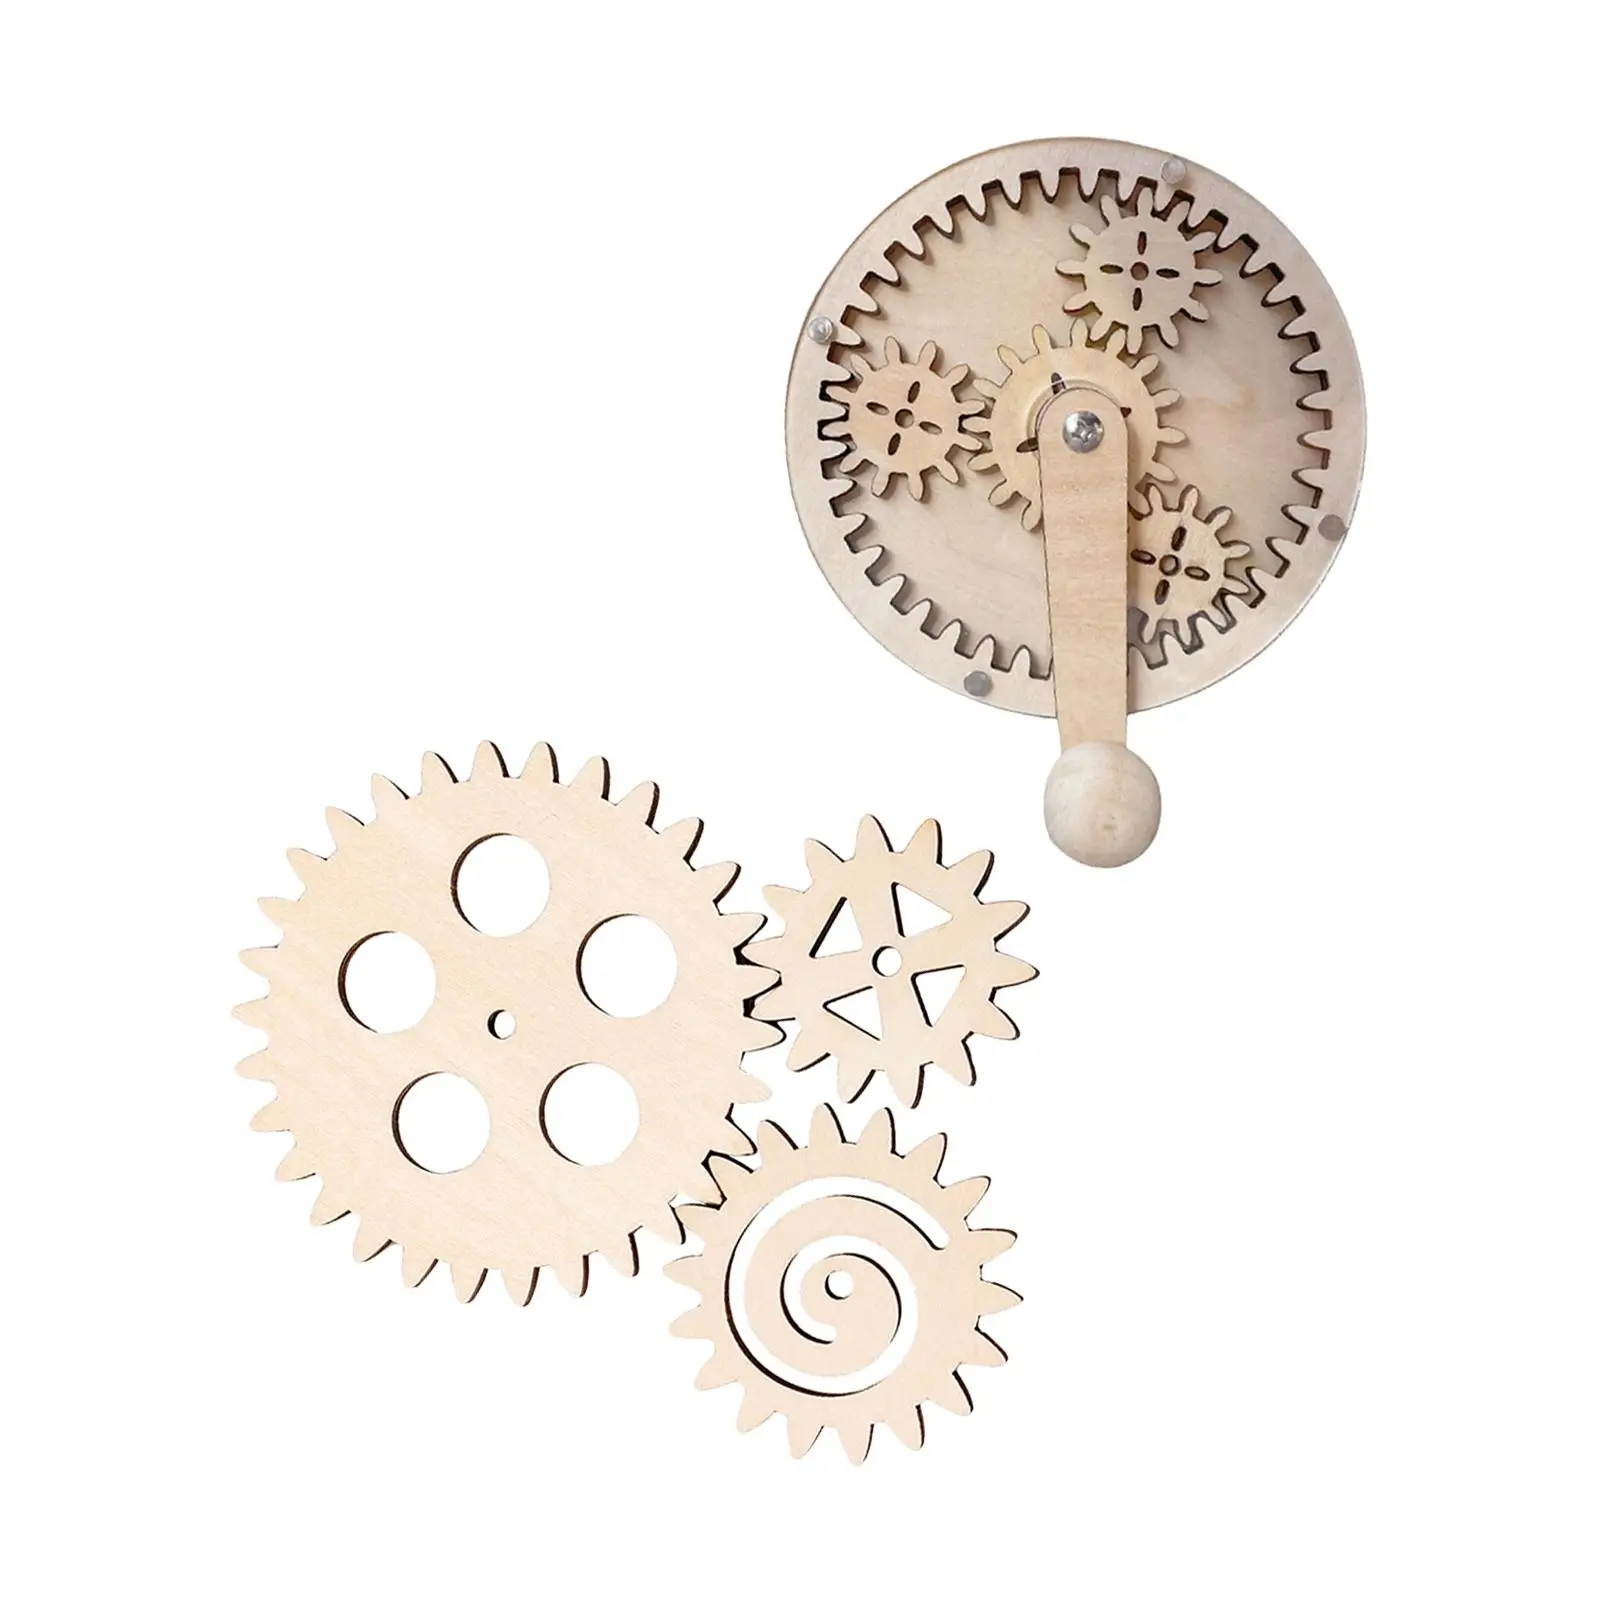 4Pcs Wooden Child Busy Board DIY Parts,Hand Crank Gear and Gear Set Educational Toys